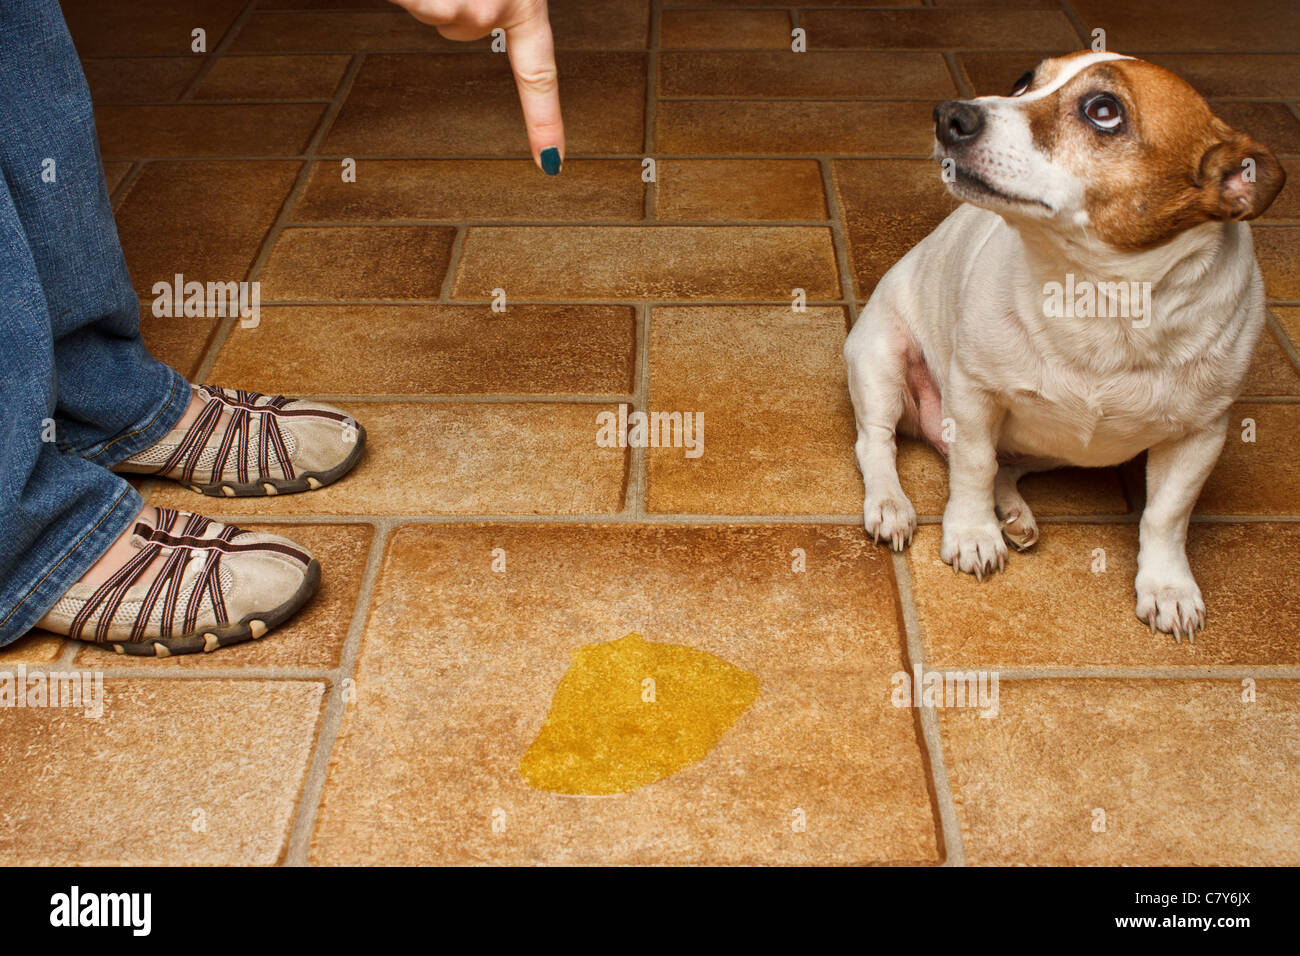 Old dog being scolded beside it's urine on the floor Stock Photo